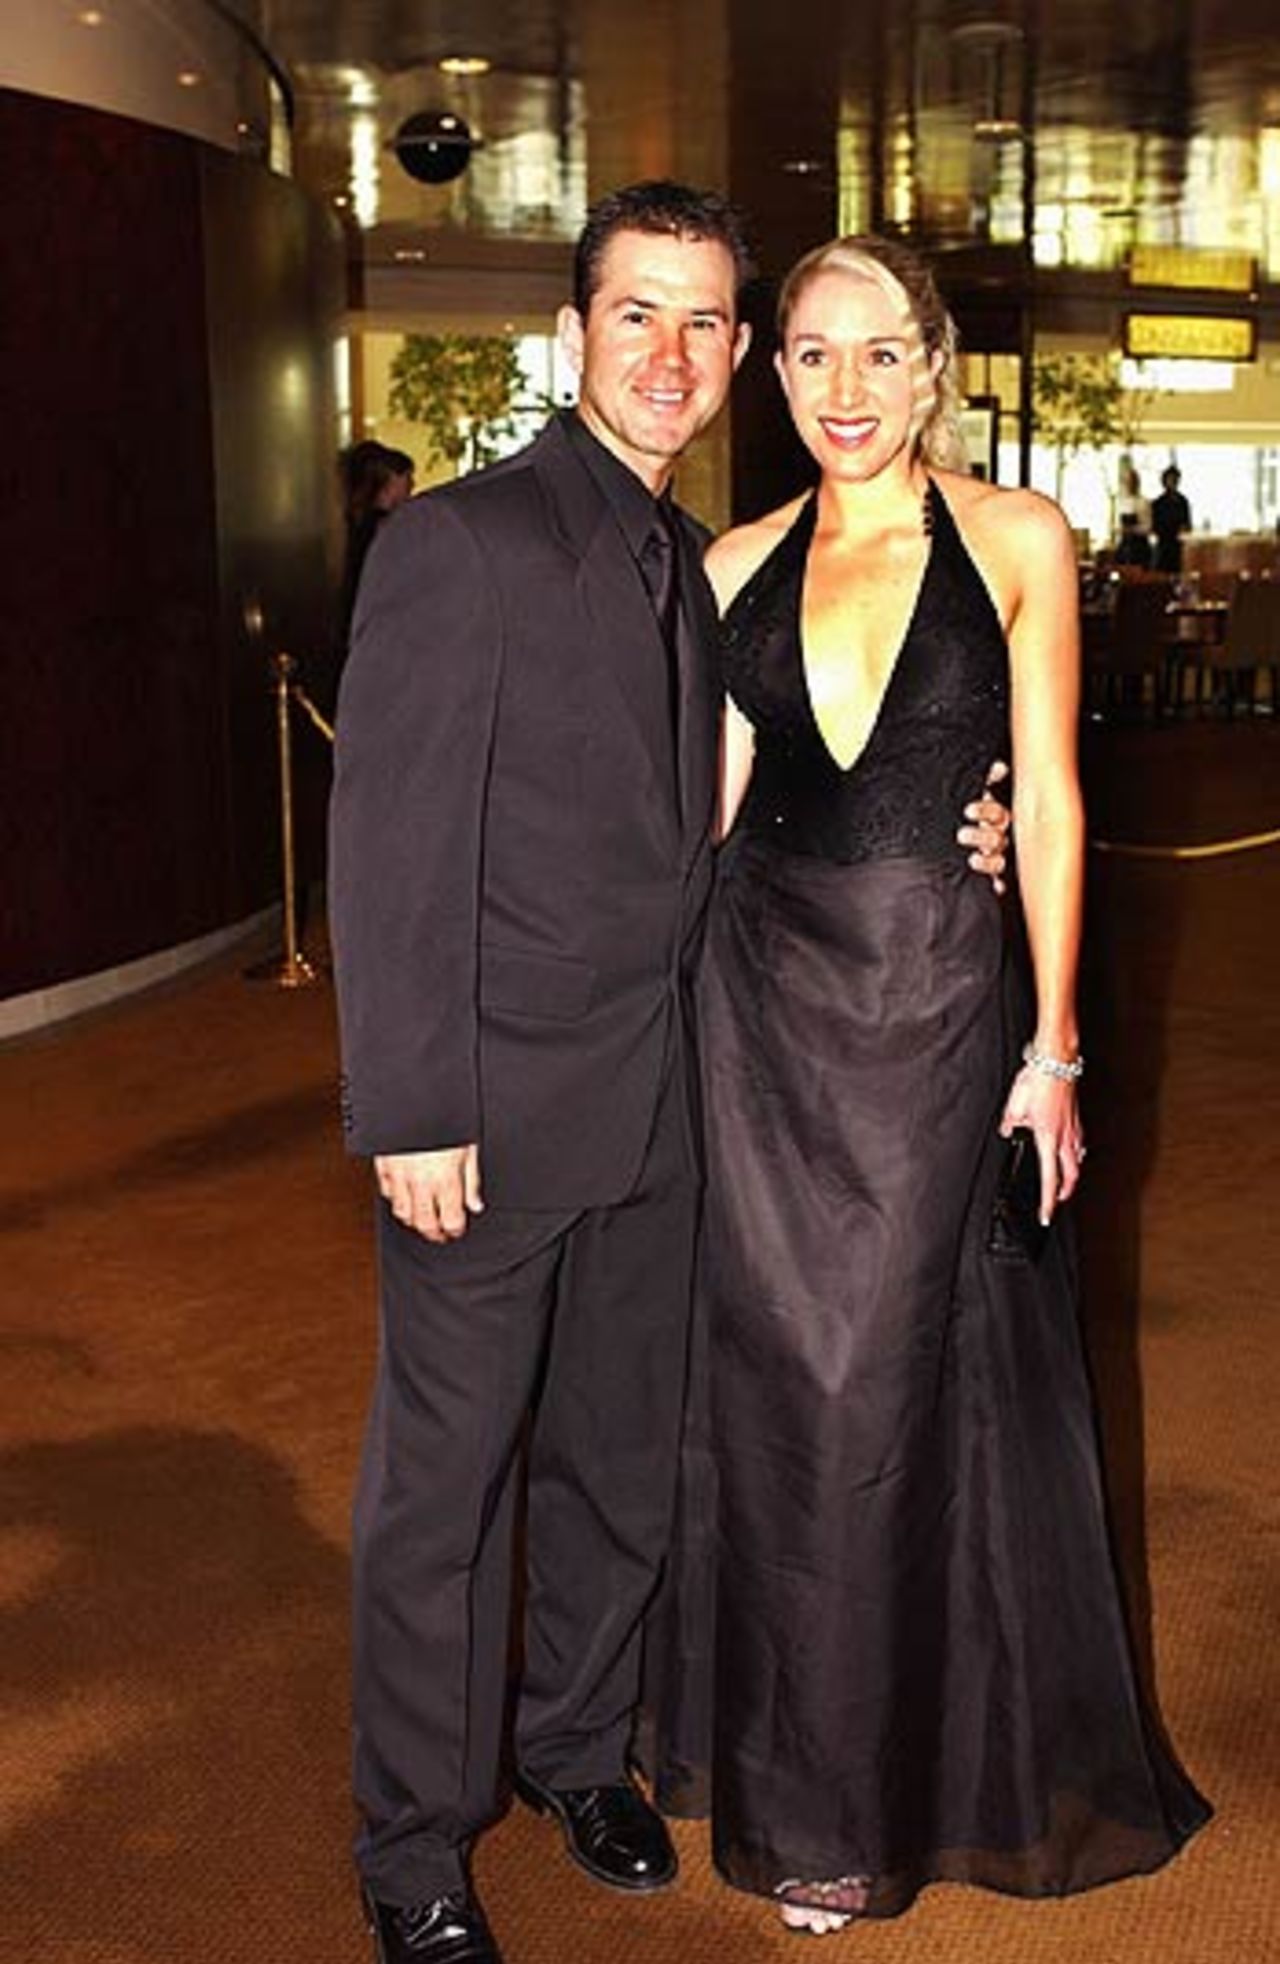 Ricky and Rianna Ponting arrive at the presentation of the Allan Border Medal in Melbourne, January 28, 2003. Ponting won hands down that year.